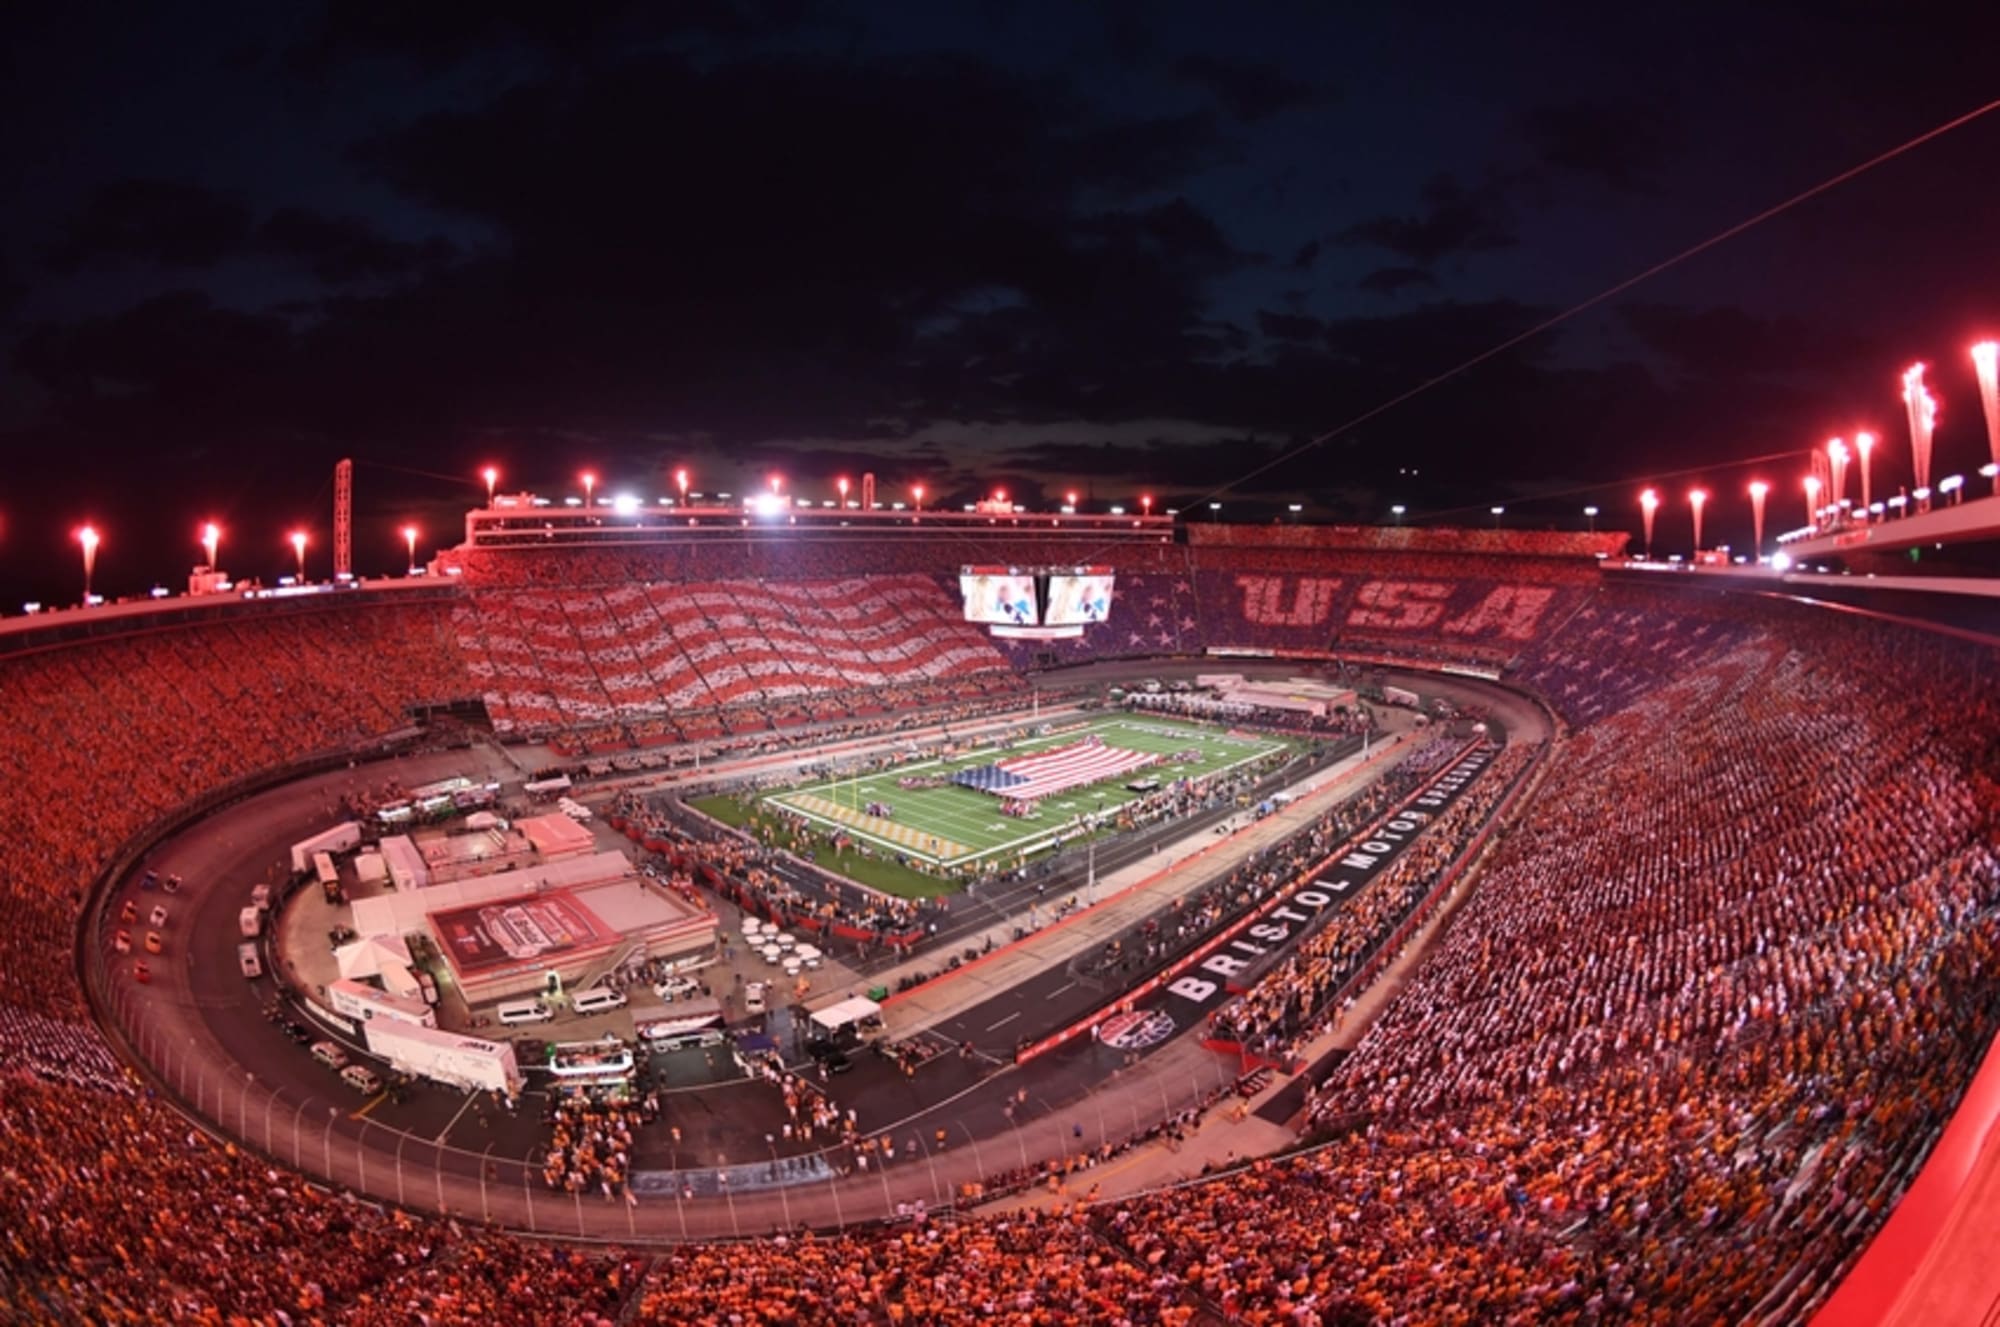 Virginia Tech vs Tennessee How many people attended game at Bristol?